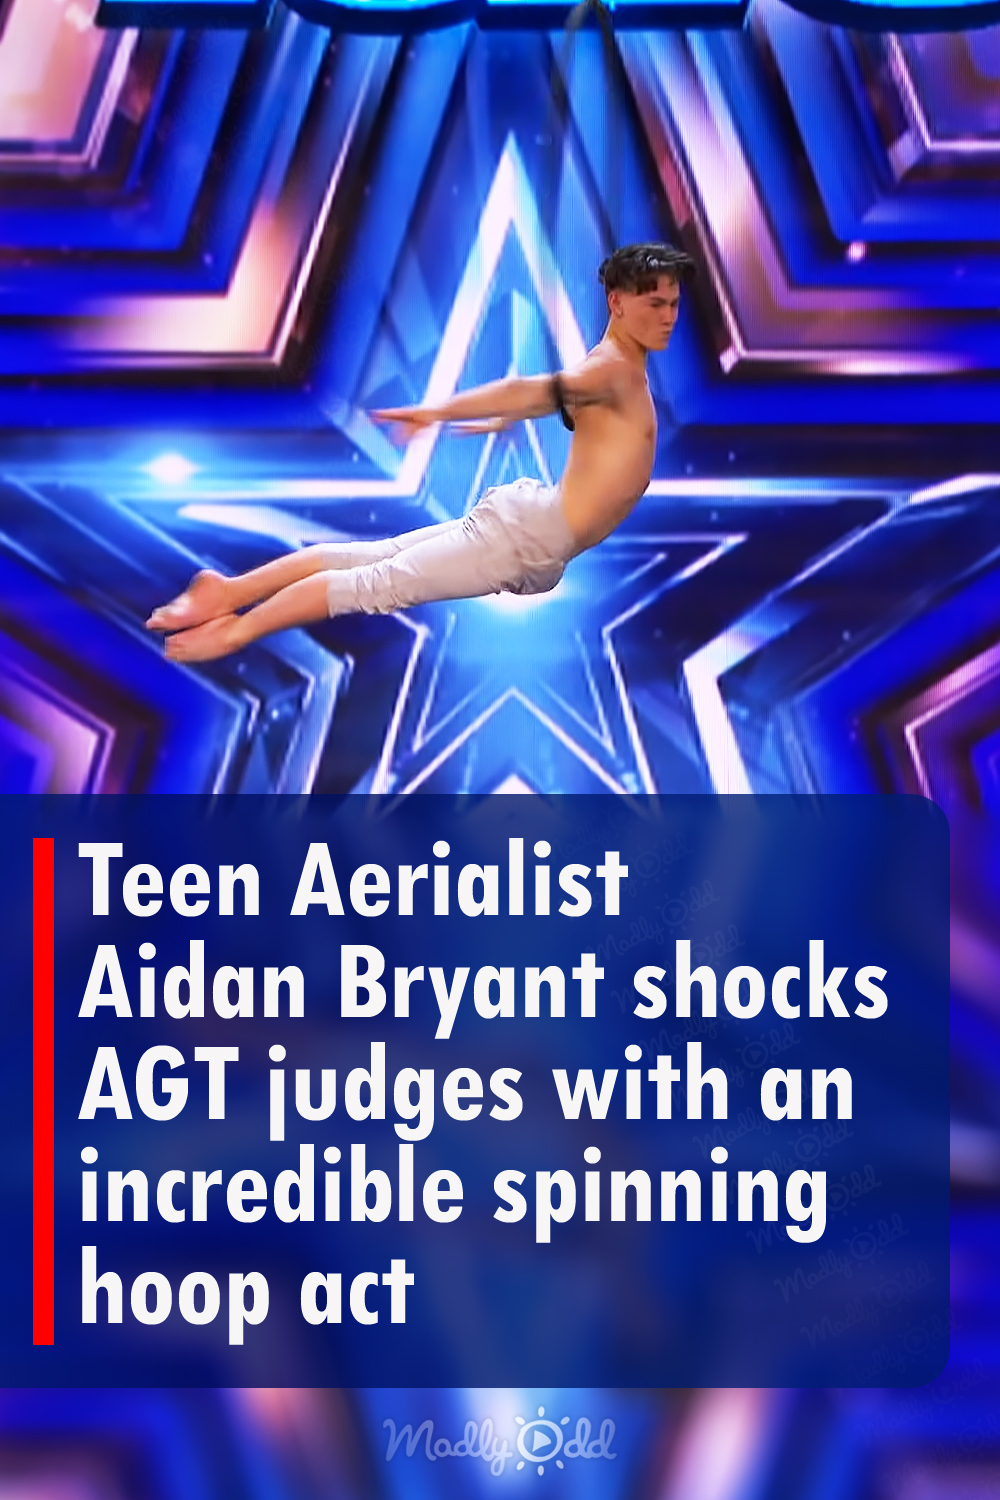 Teen Aerialist Aidan Bryant shocks AGT judges with an incredible spinning hoop act